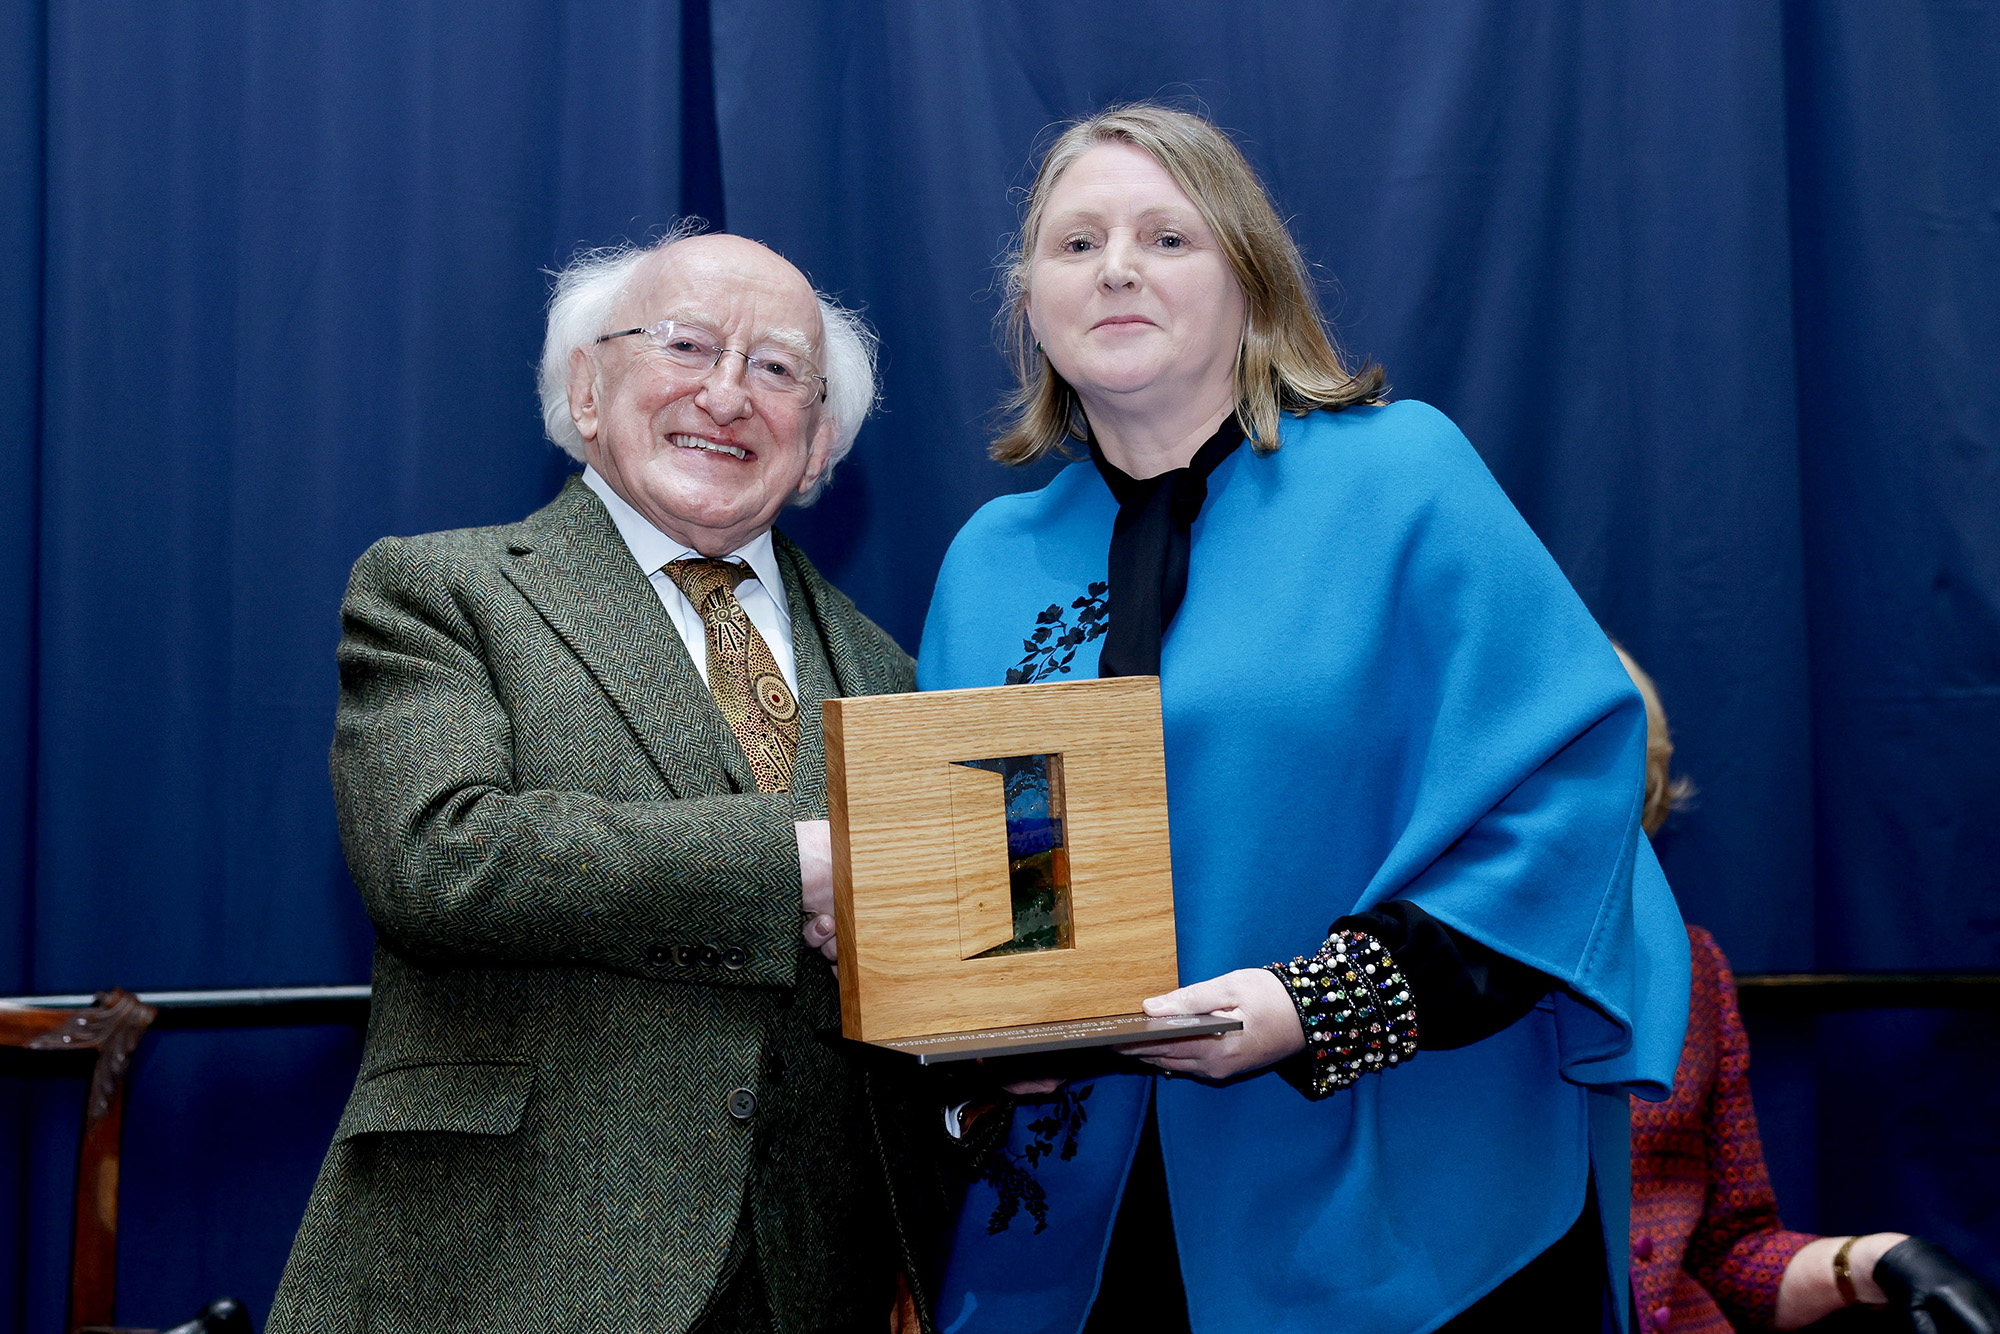 Caoilfhionn Gallagher KC presented with presidential award